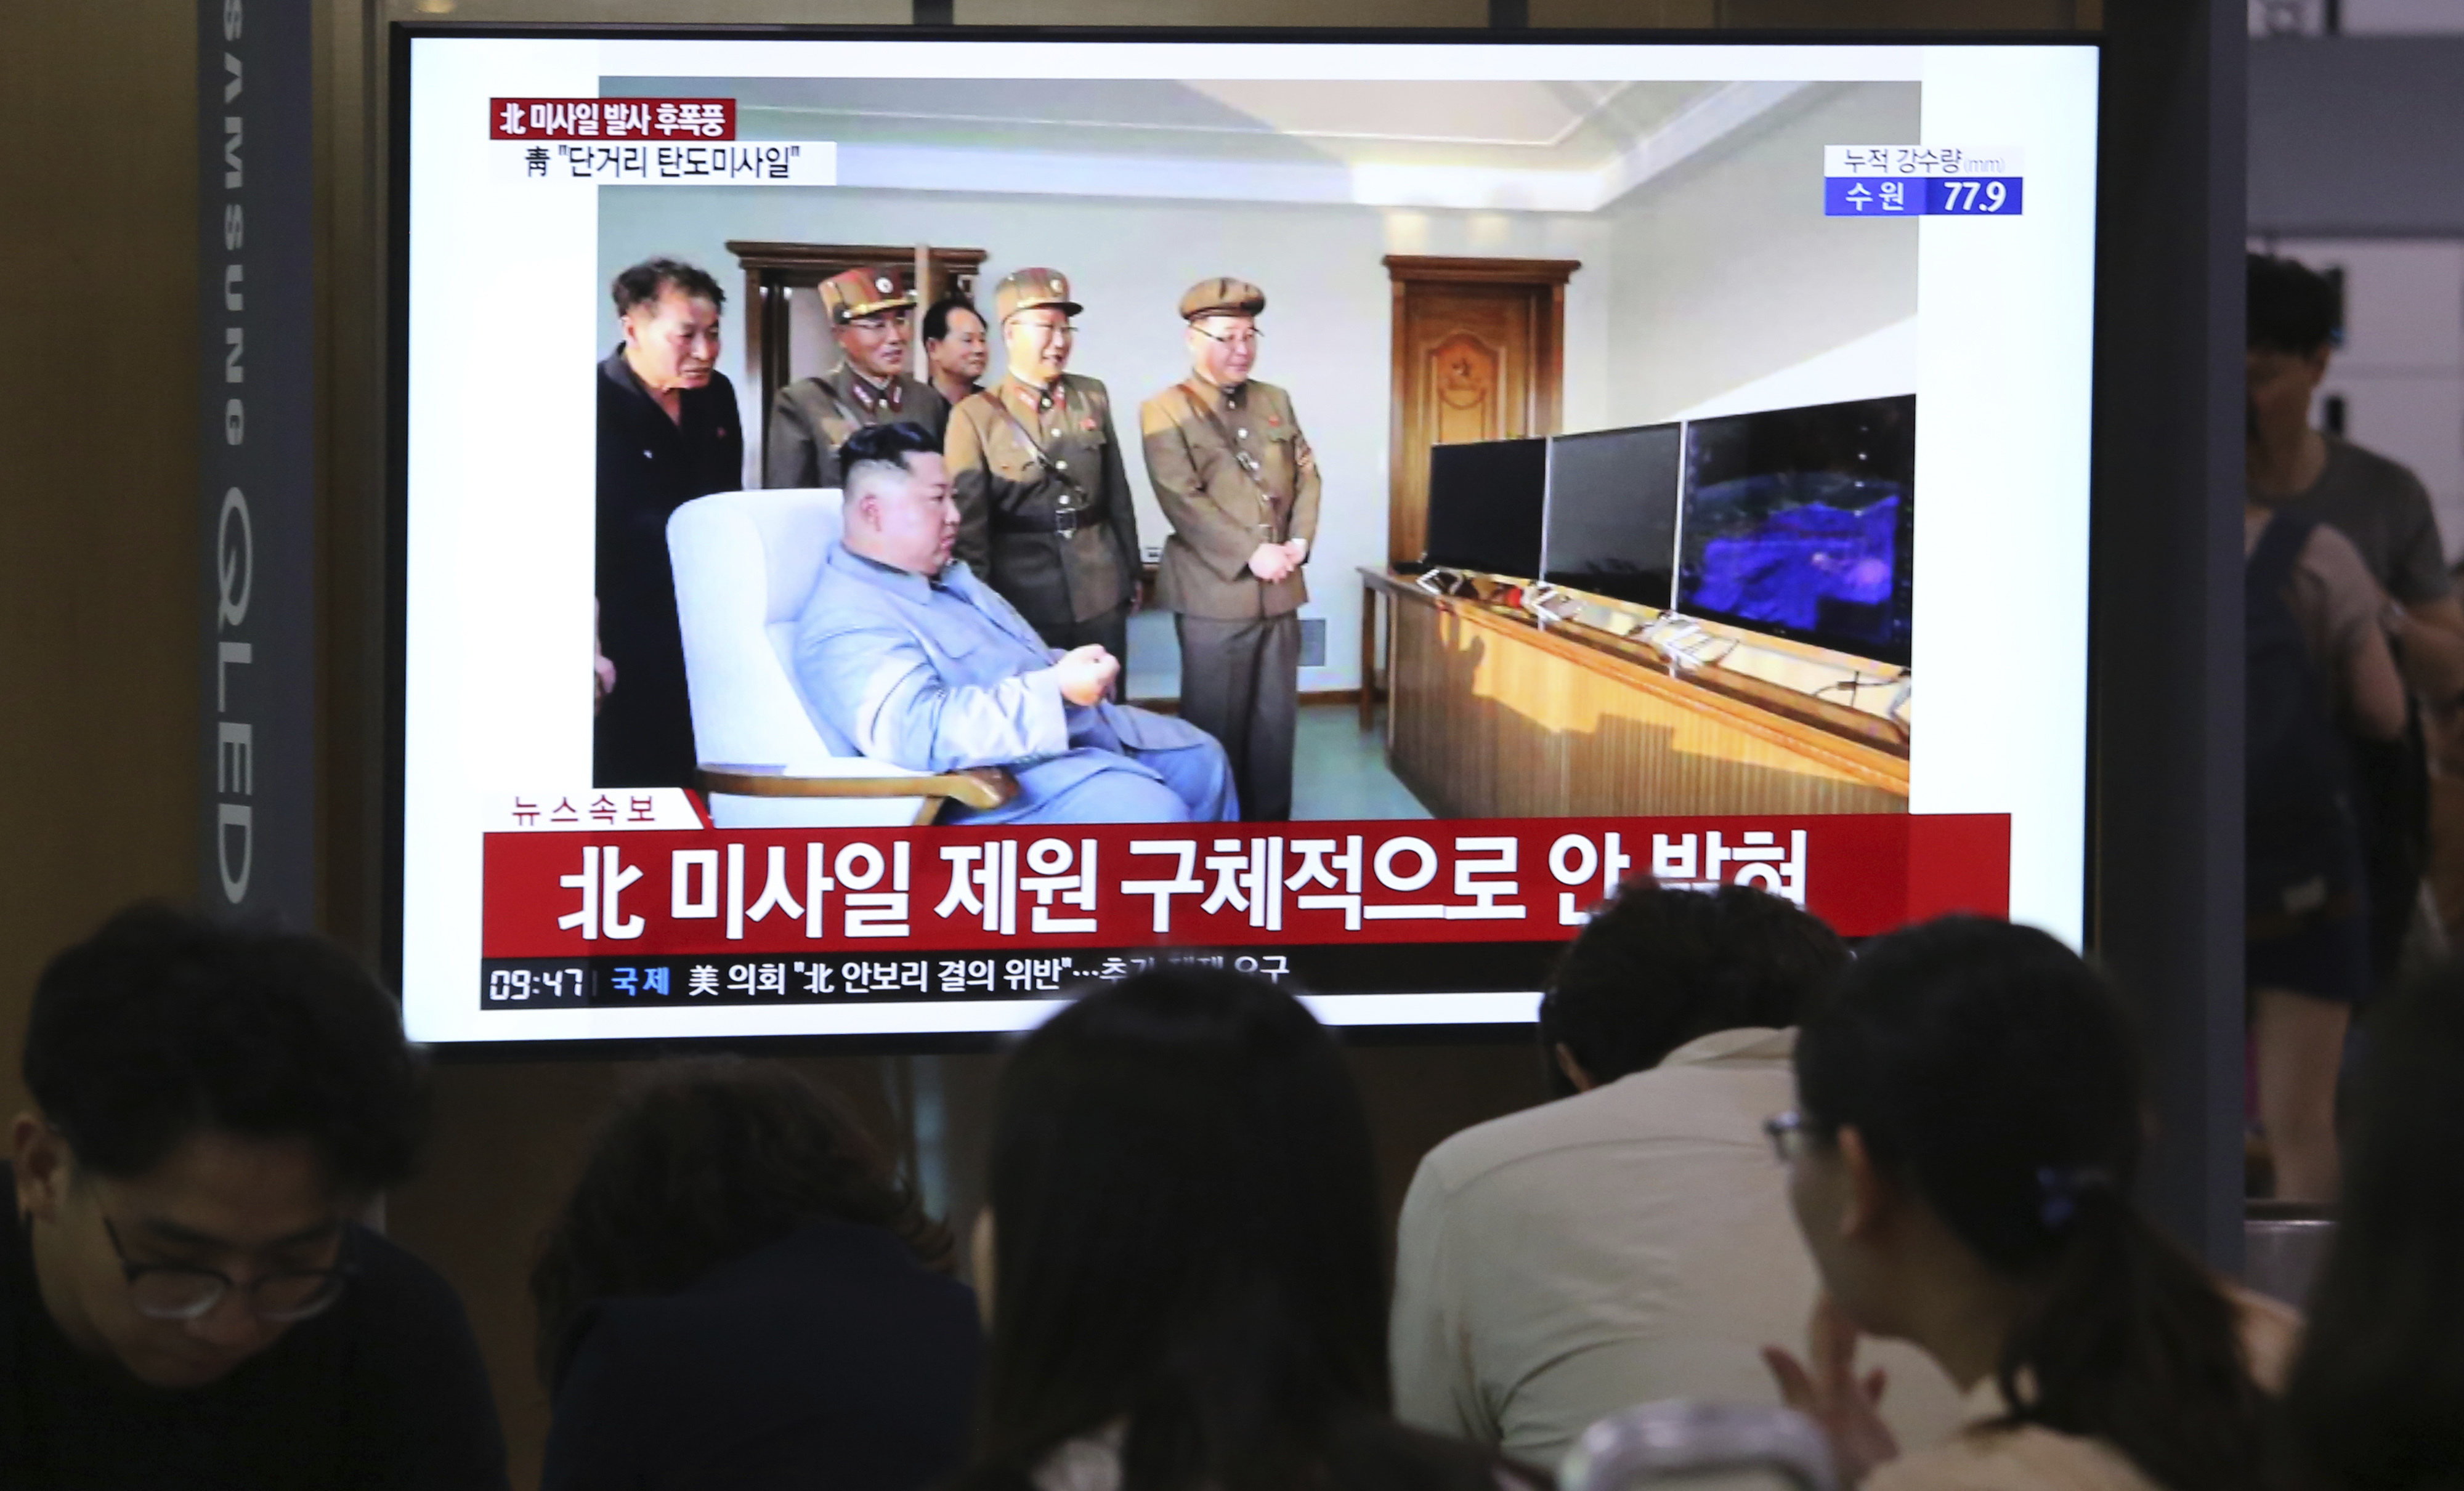 People watch a TV showing an image of North Korean leader Kim Jong Un during a news program at the Seoul Railway Station in Seoul, South Korea, Friday, July 26, 2019. A day after two North Korean missile launches rattled Asia, the nation said Friday it had tested a 